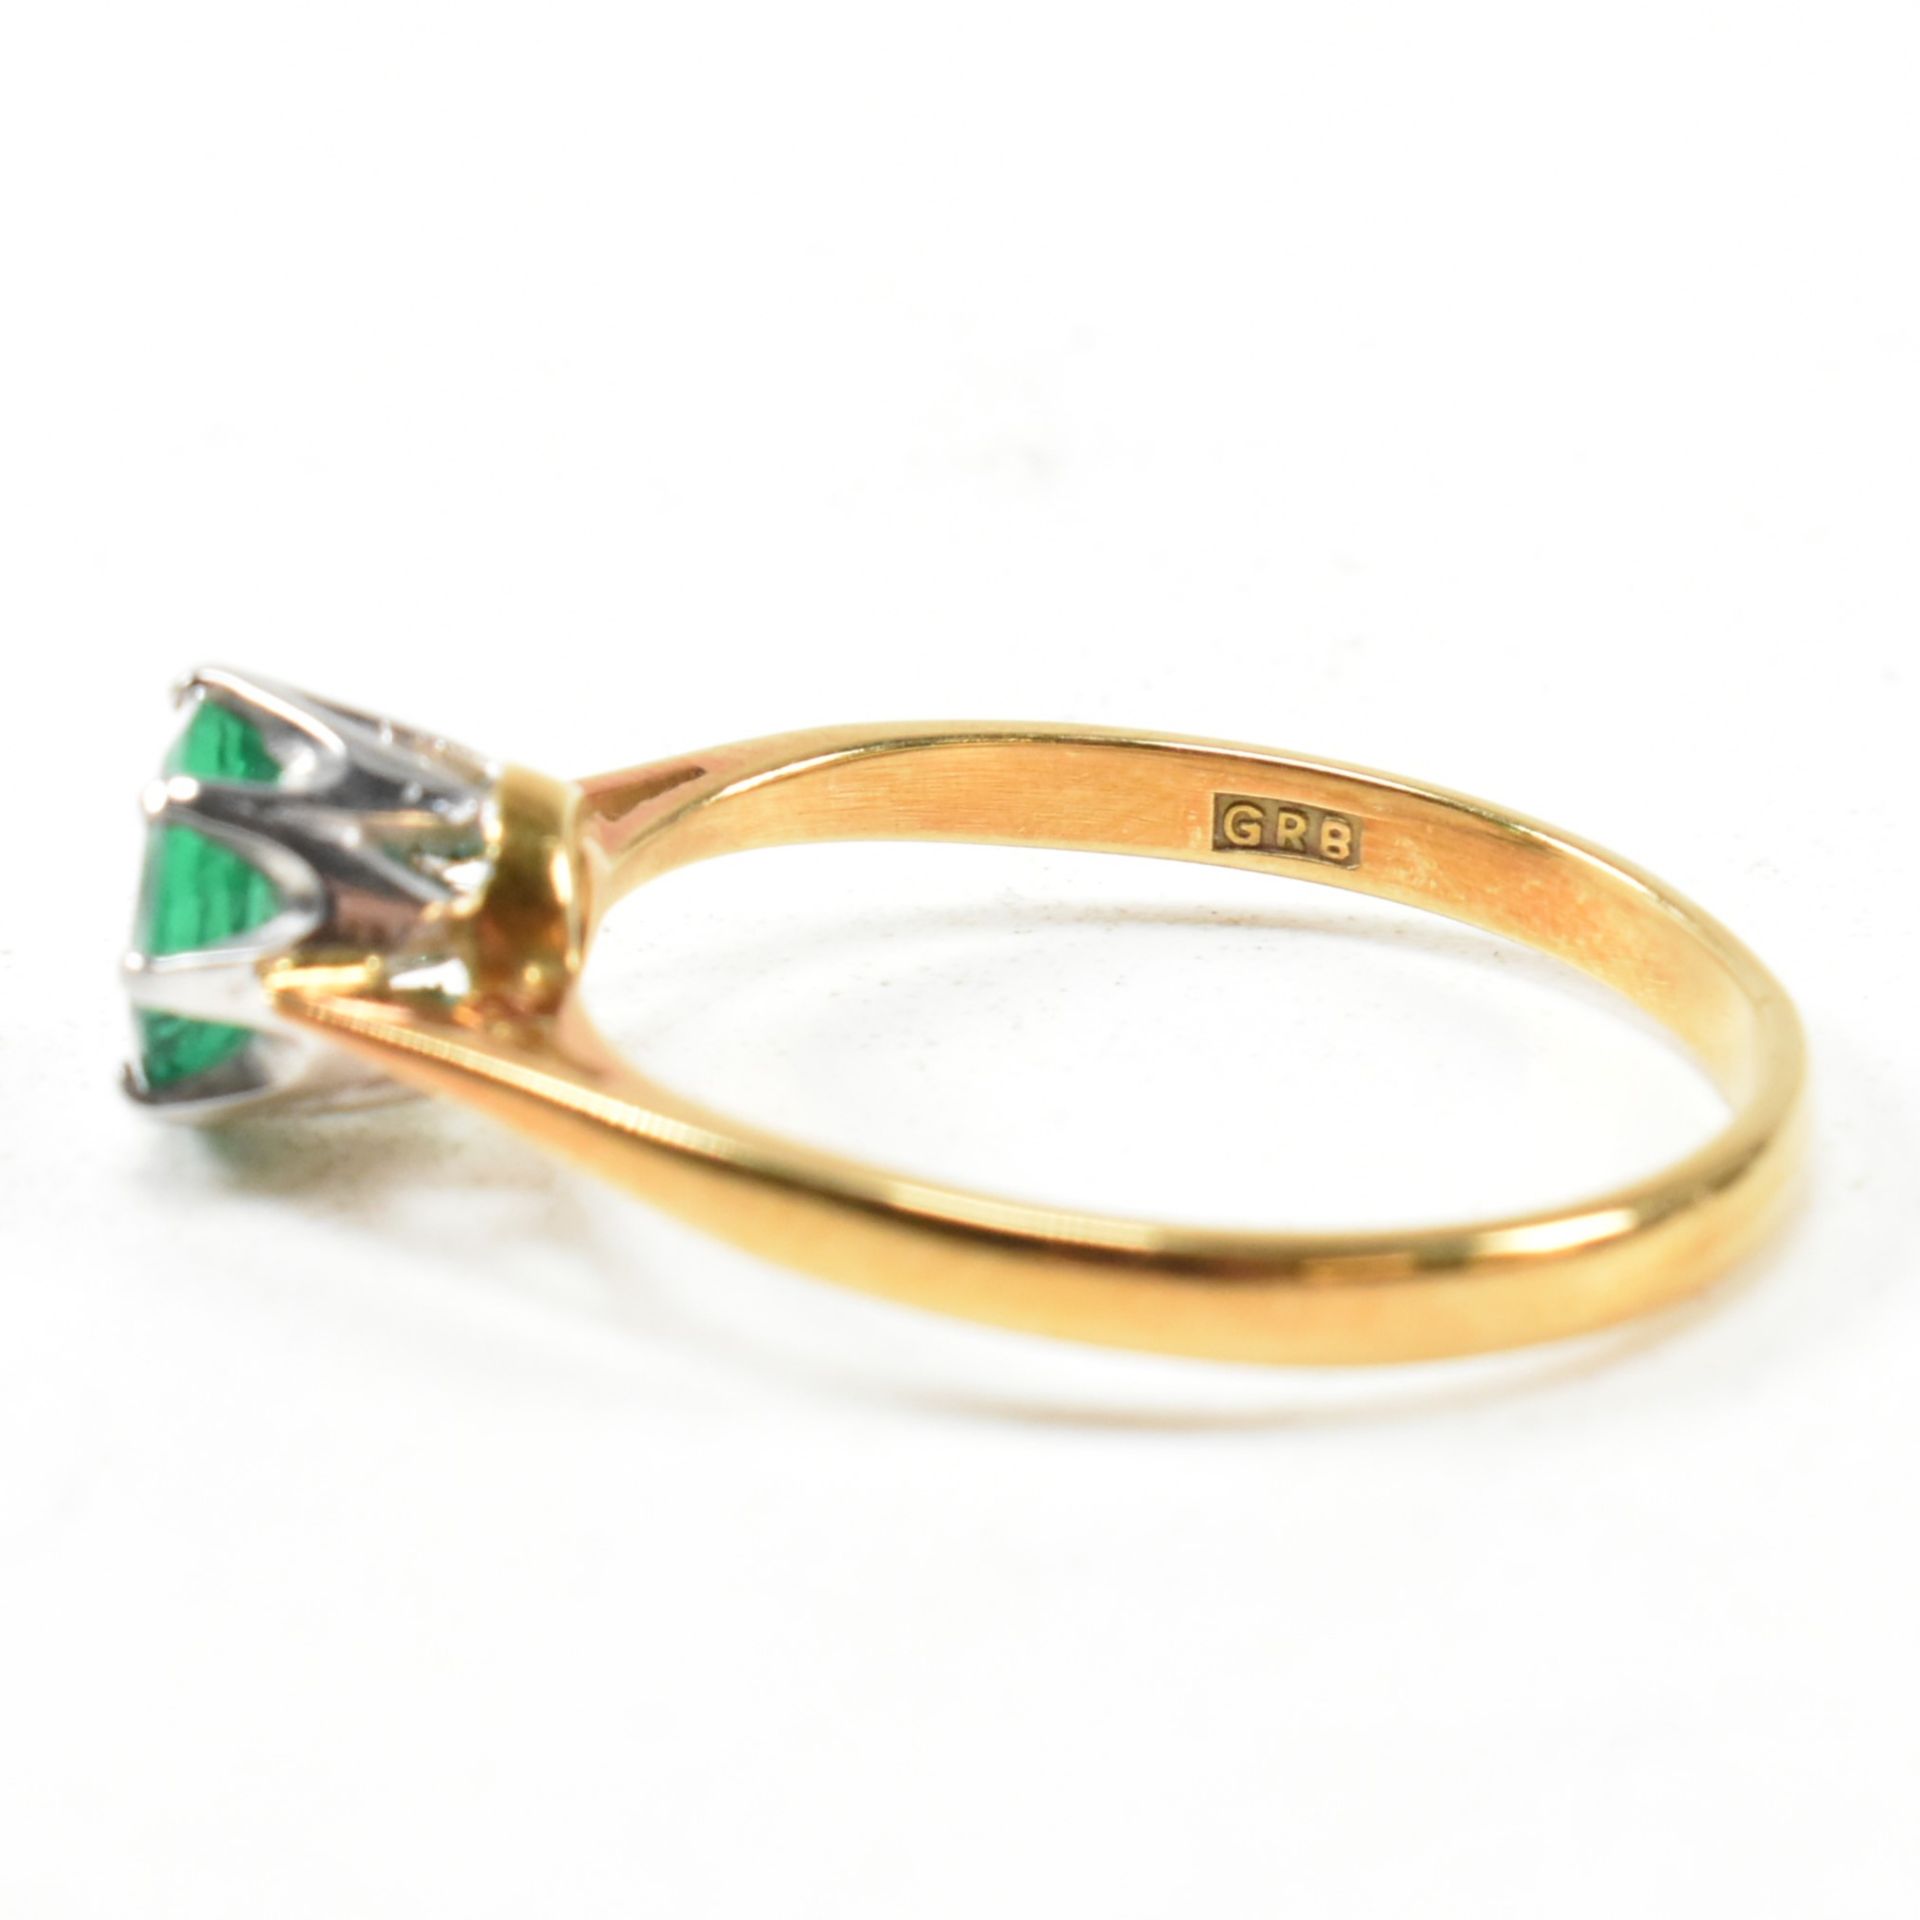 HALLMARKED 18CT GOLD & EMERALD SOLITAIRE RING - Image 6 of 10